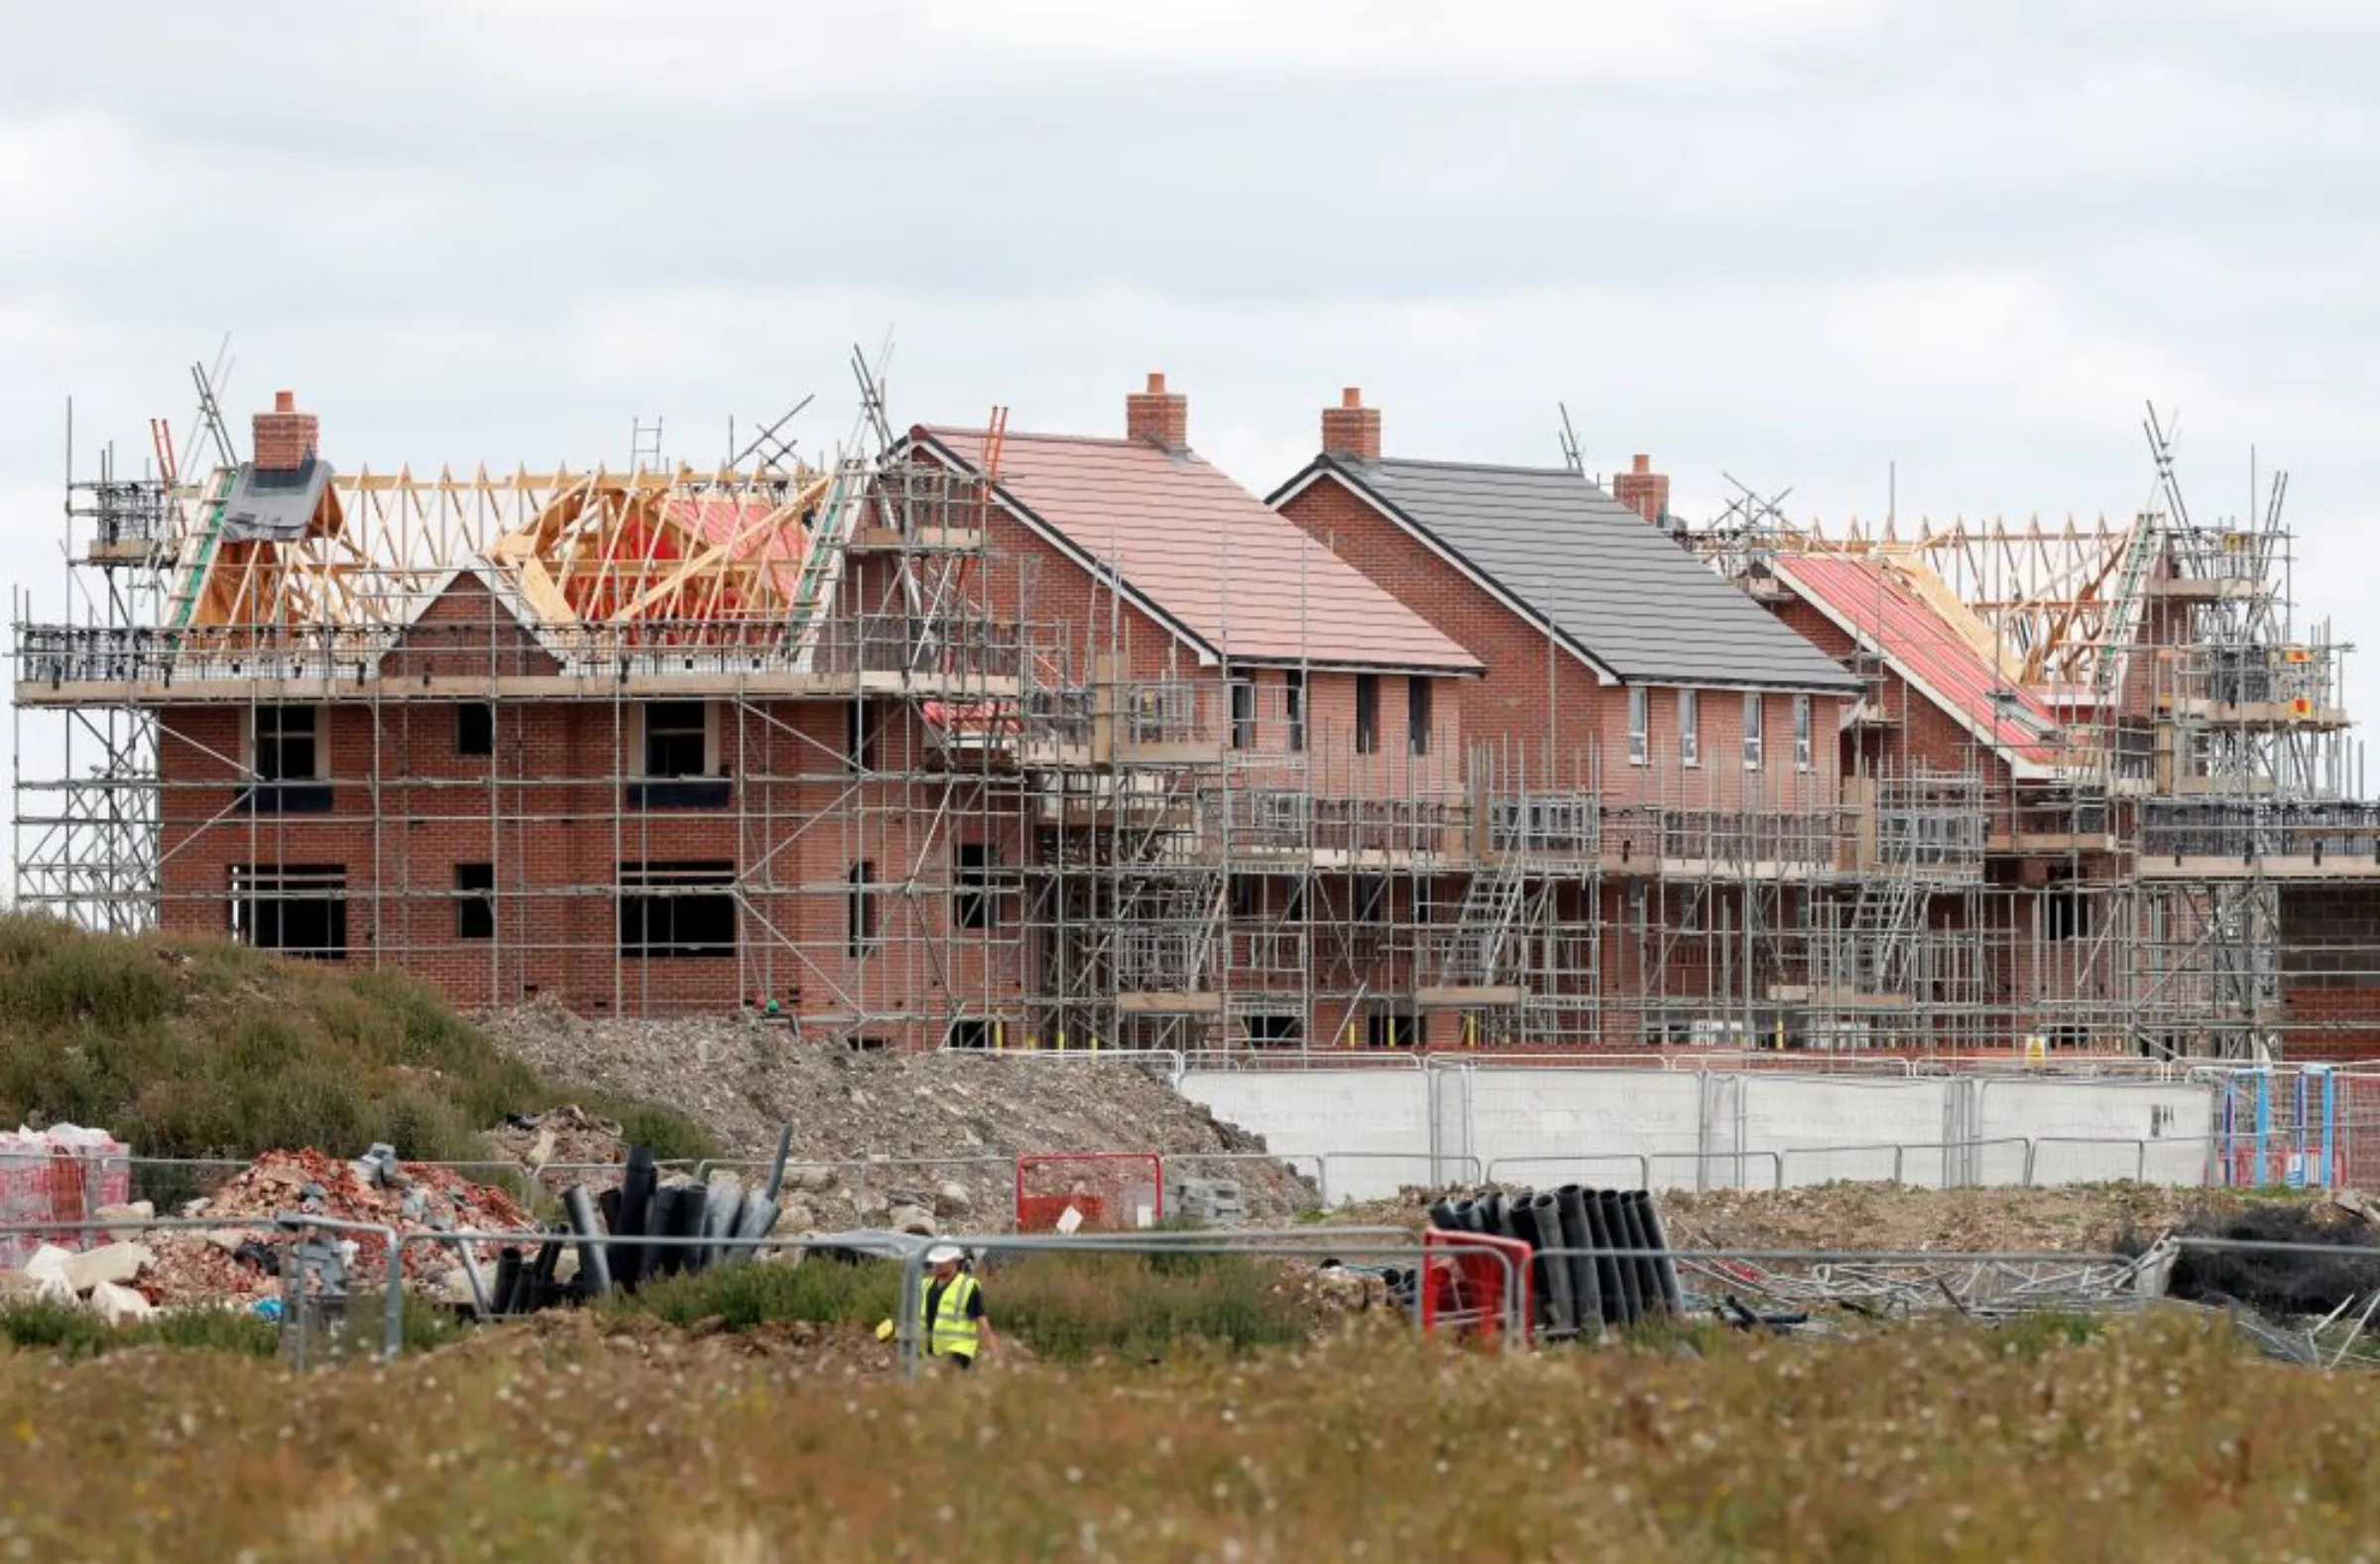 New houses under construction are pictured in Aylesbury, Britain August 6, 2020